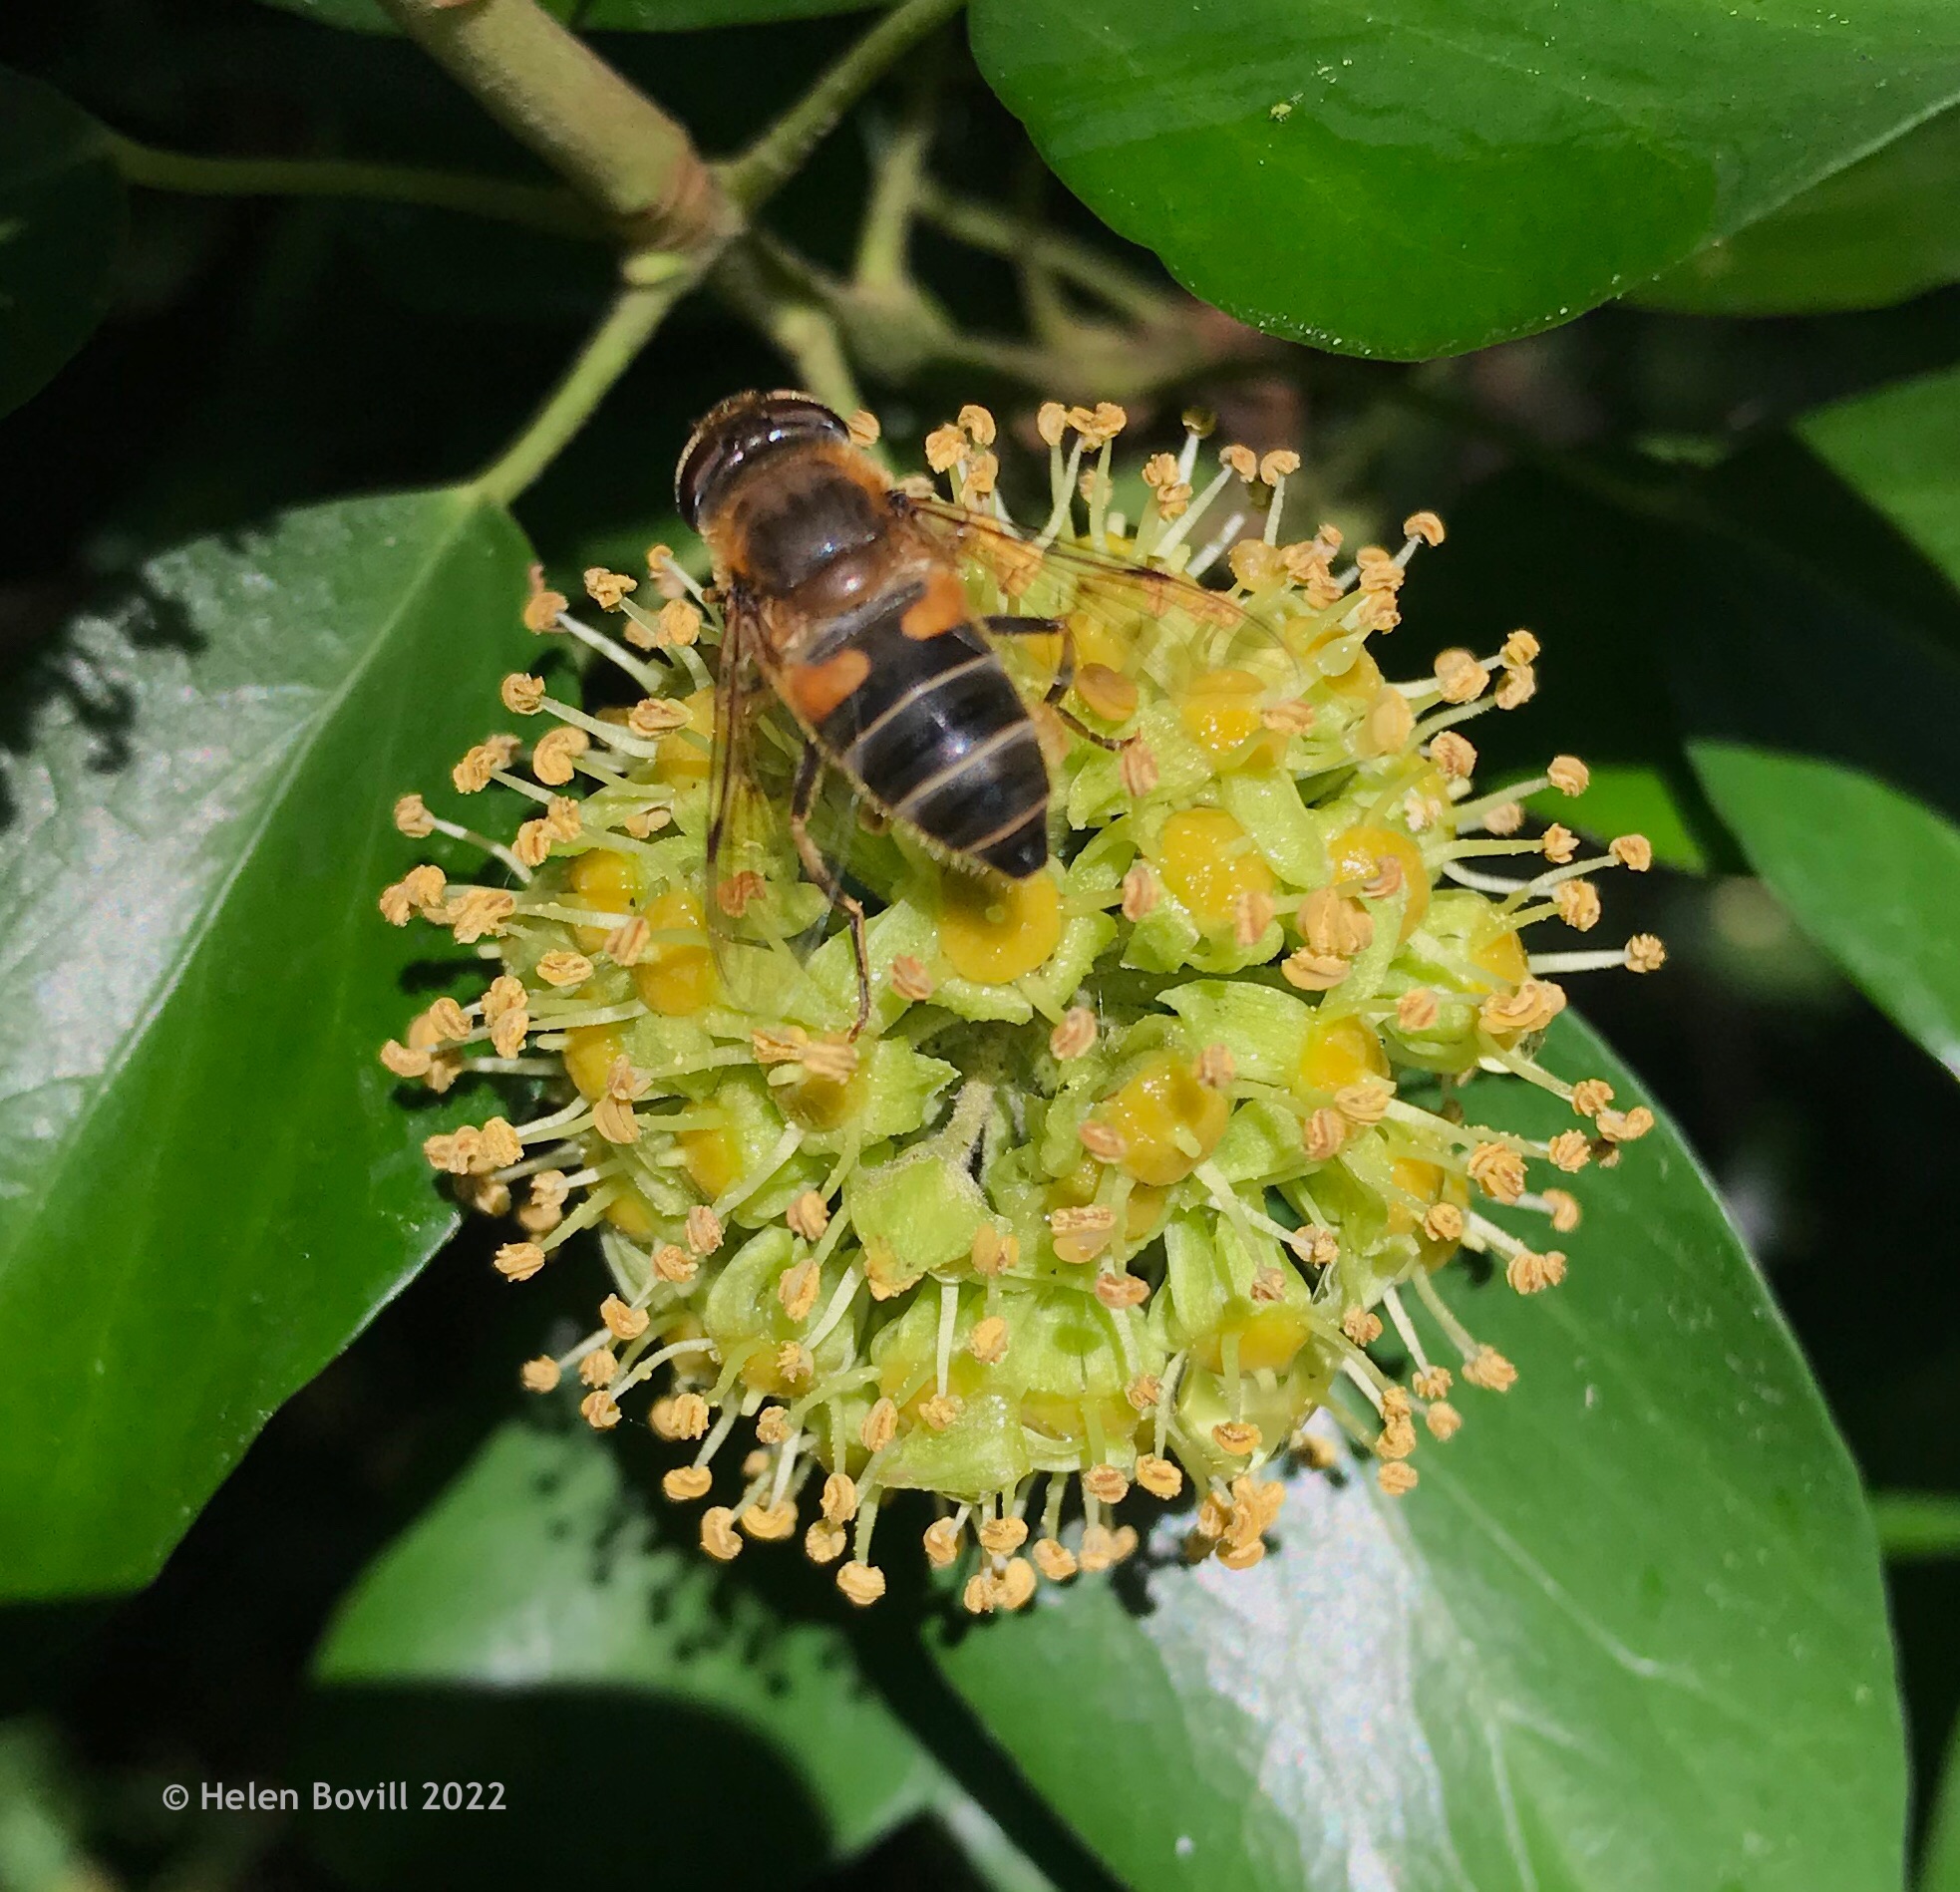 Dronefly on Ivy Flower